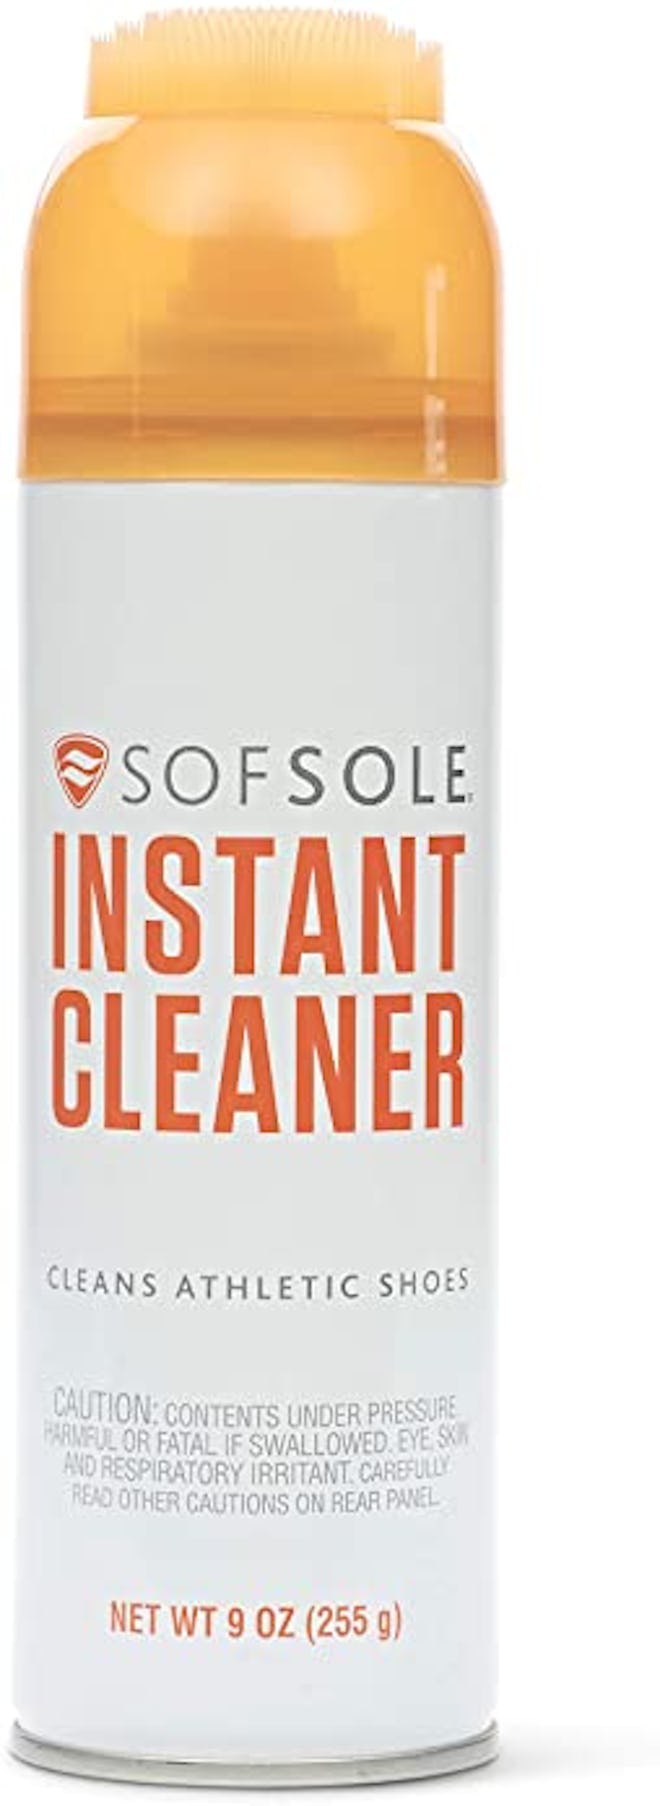 Sof Sole Instant Cleaner Foaming Stain Remover for Athletic Shoes